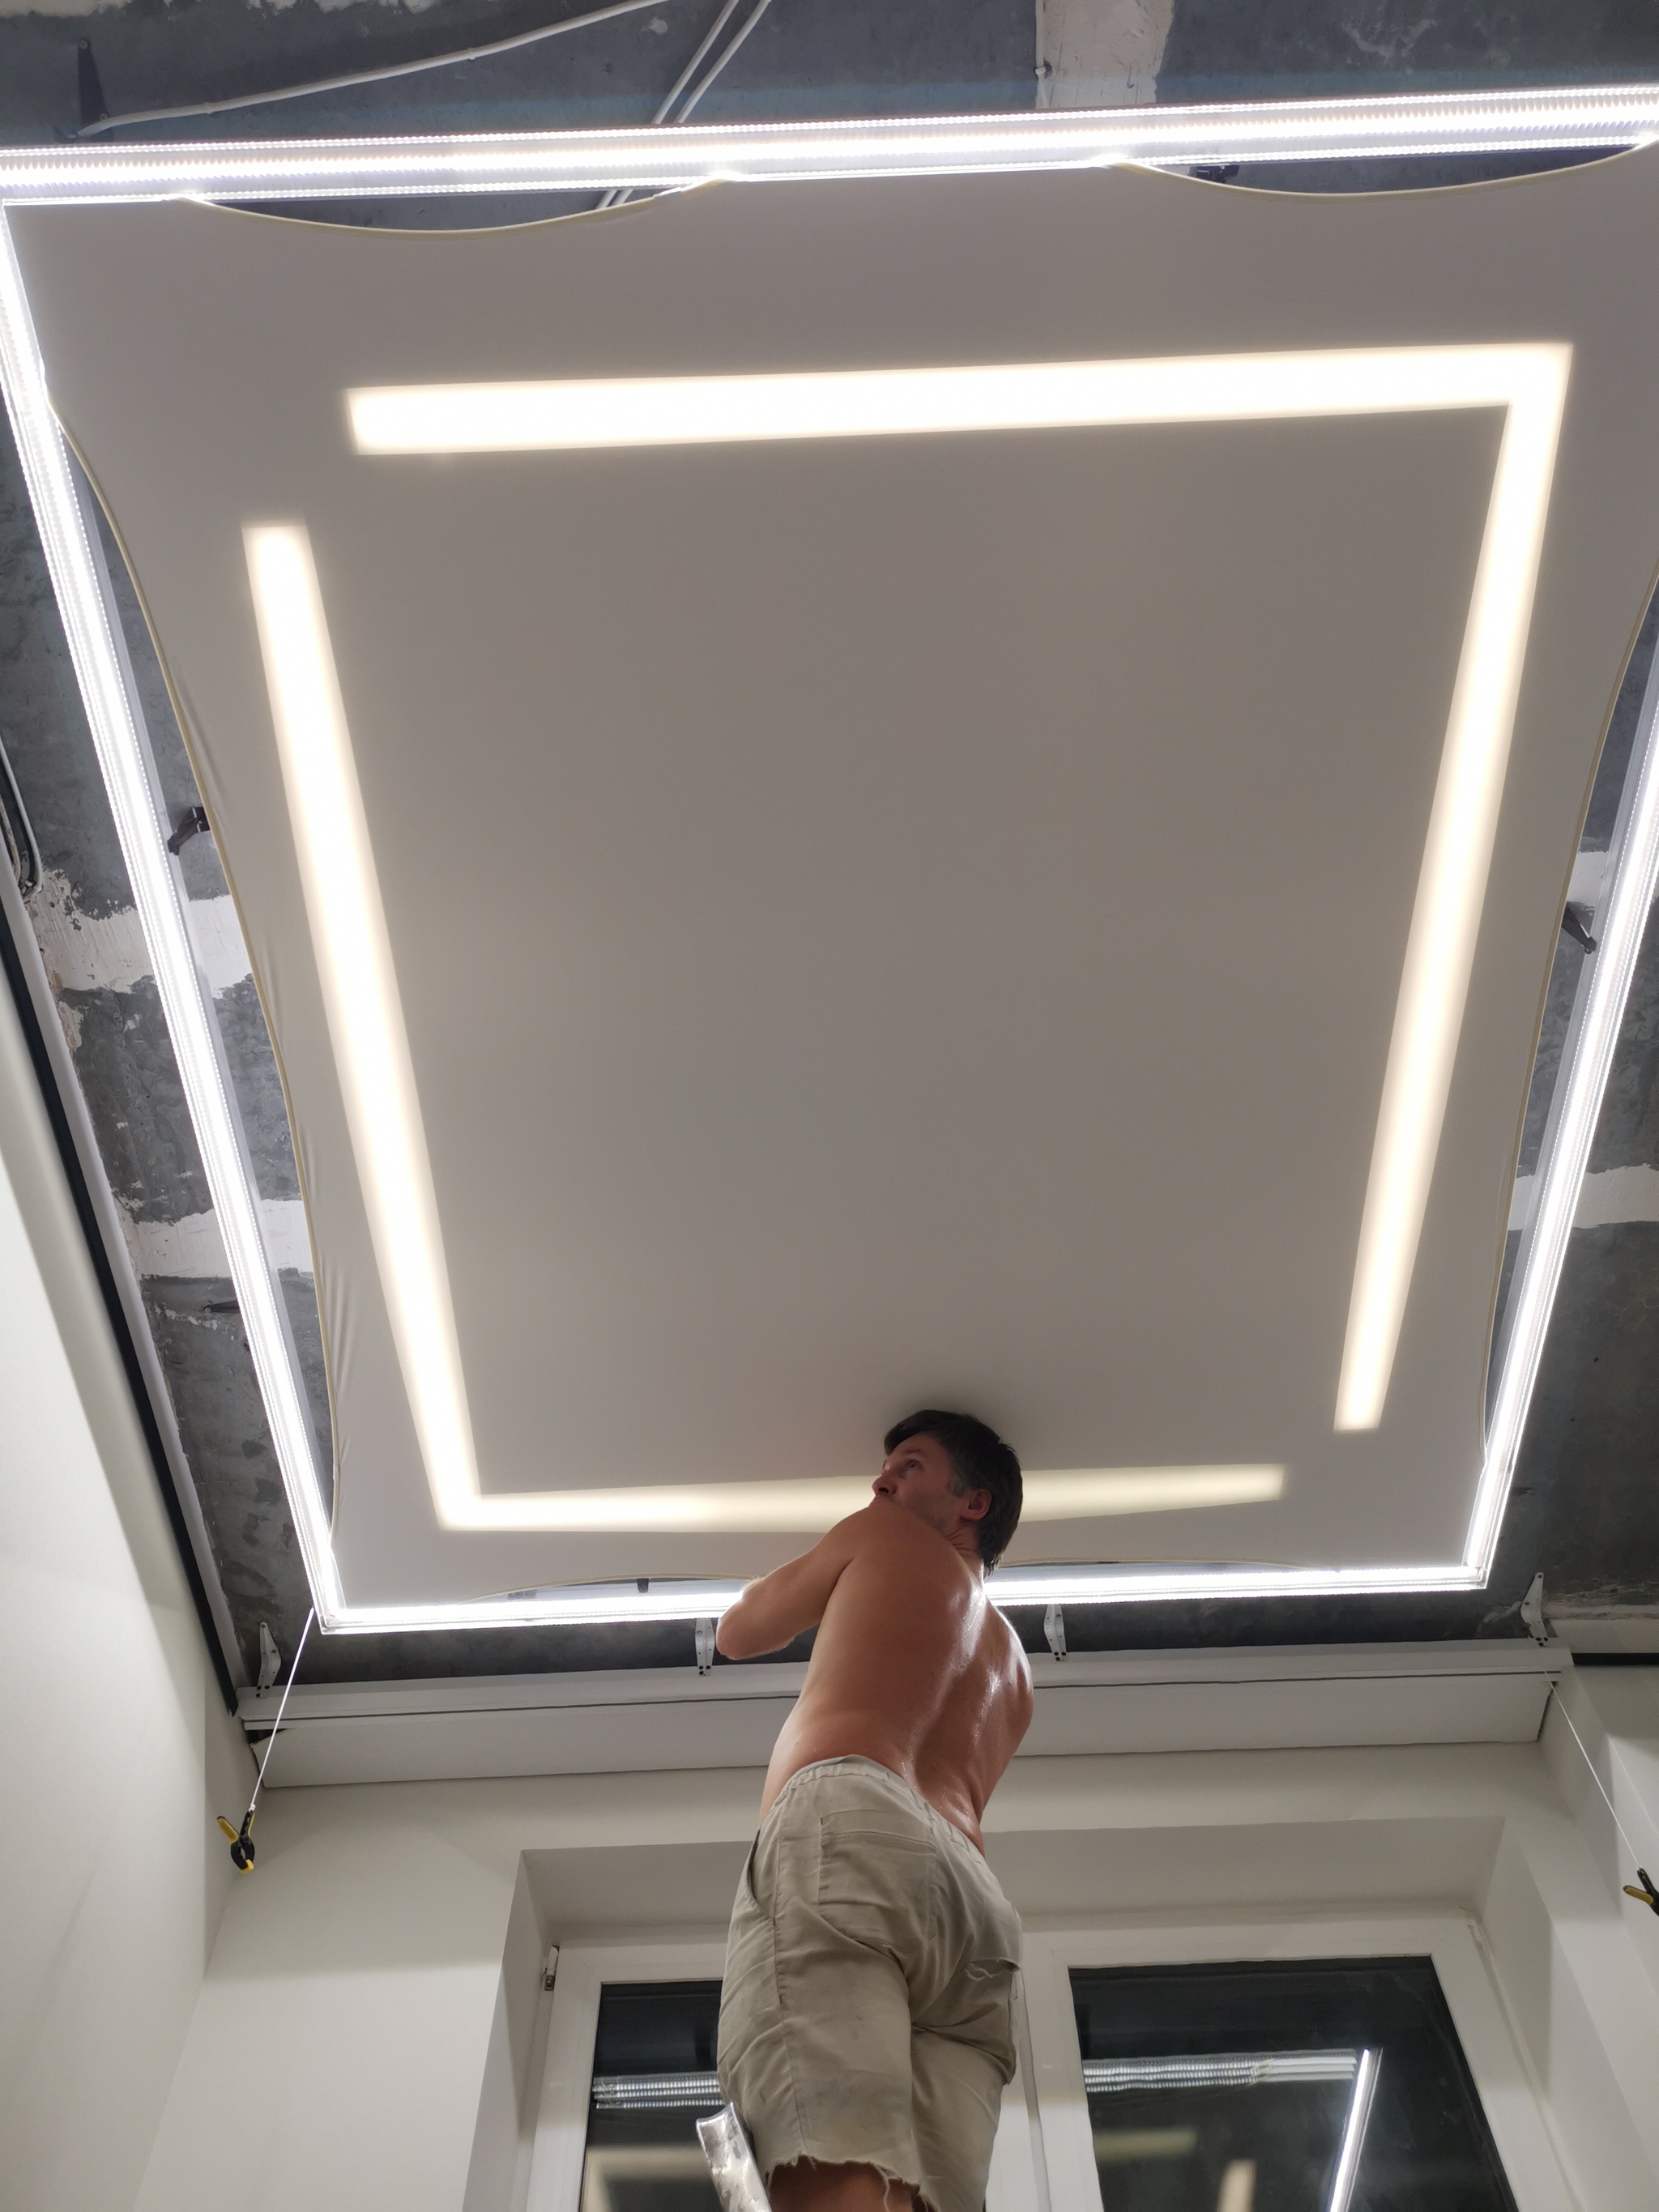 Light lines in the stretch ceiling with your own hands! - My, Repair, Ceiling, LED Strip Light, Stretch ceiling, With your own hands, Video, Longpost